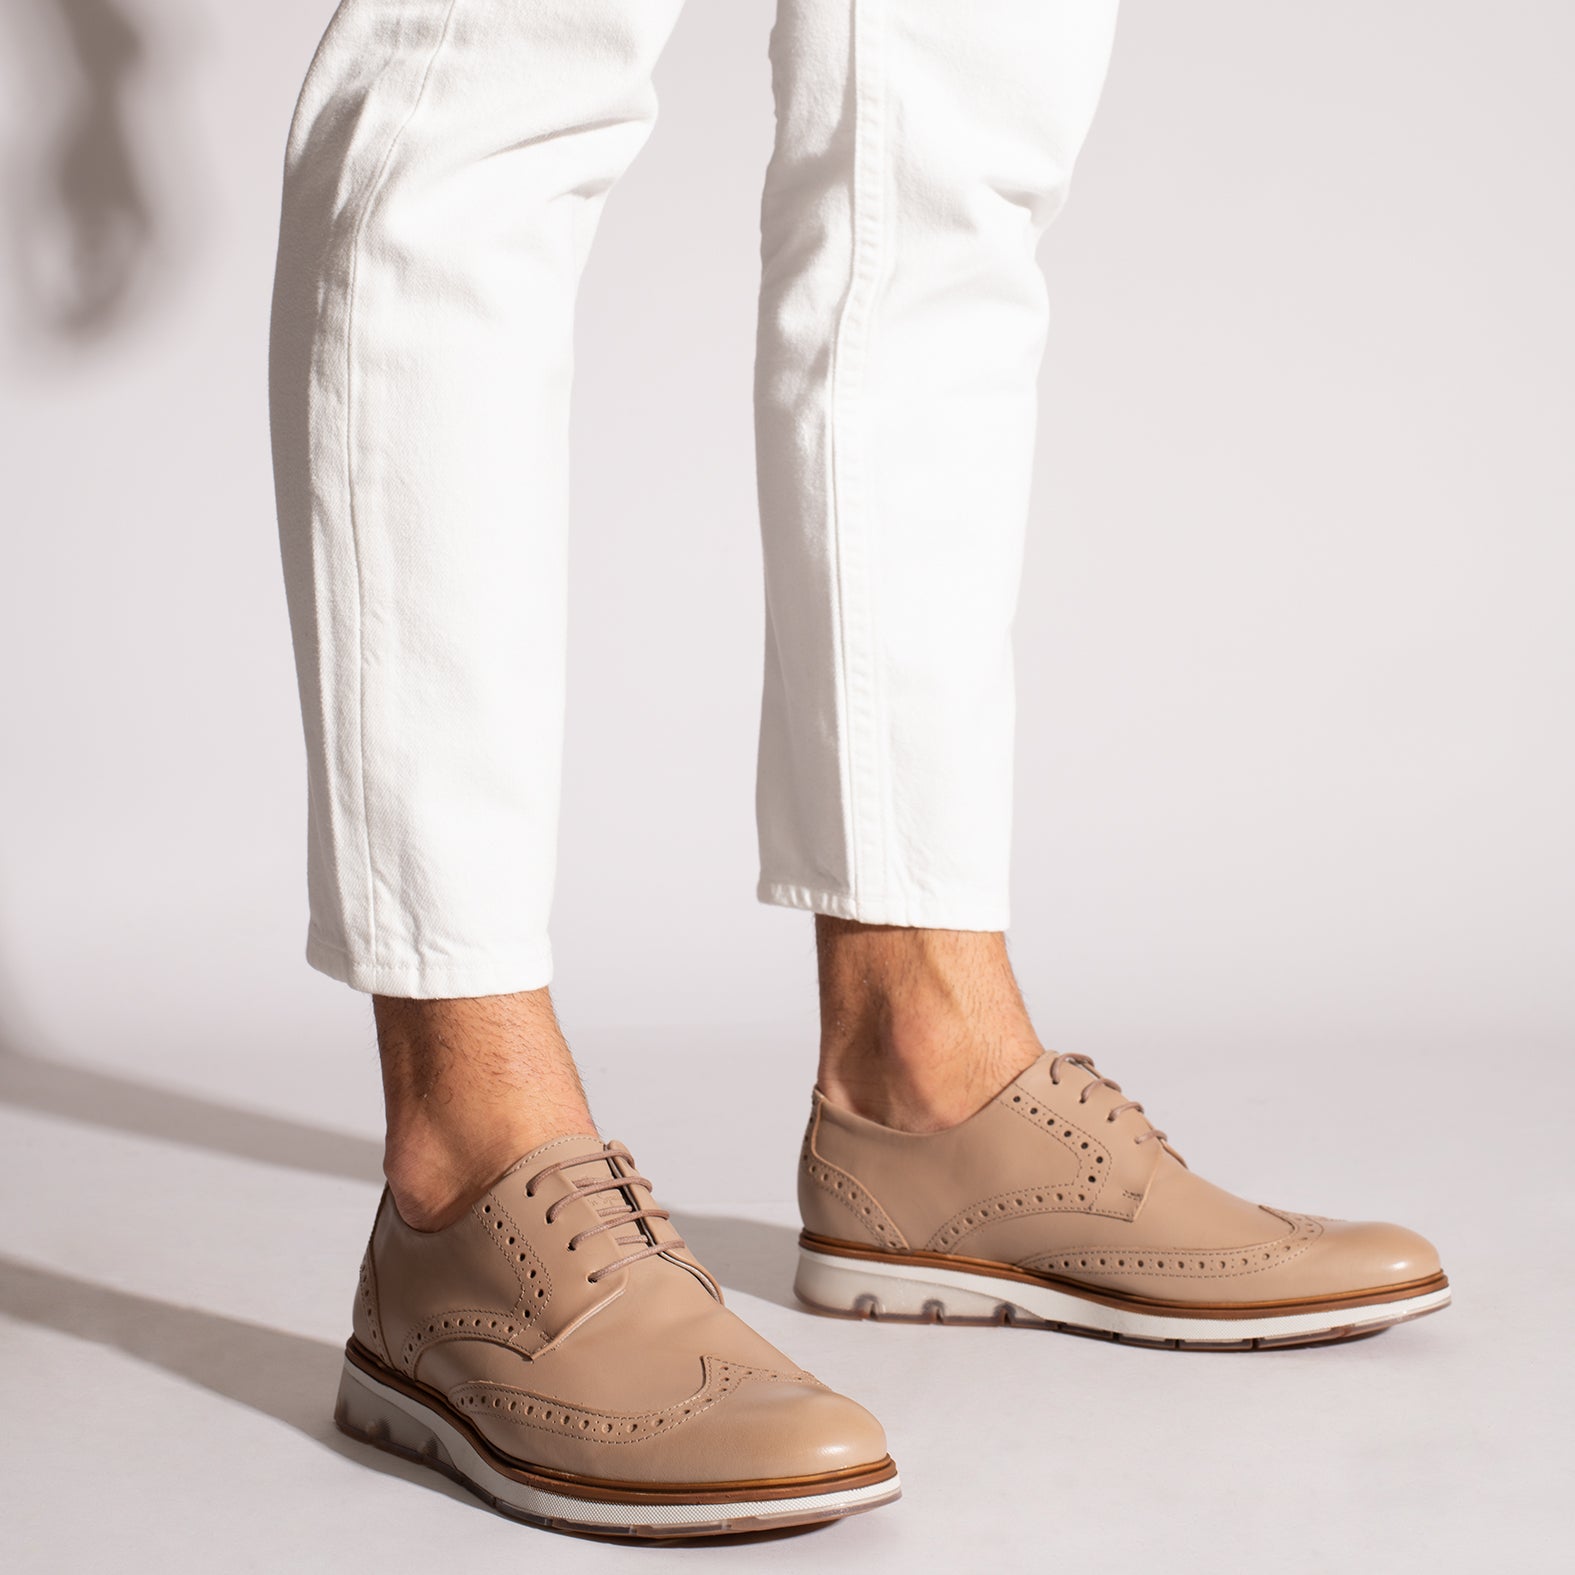 OXFORD – BEIGE classic english style brogue